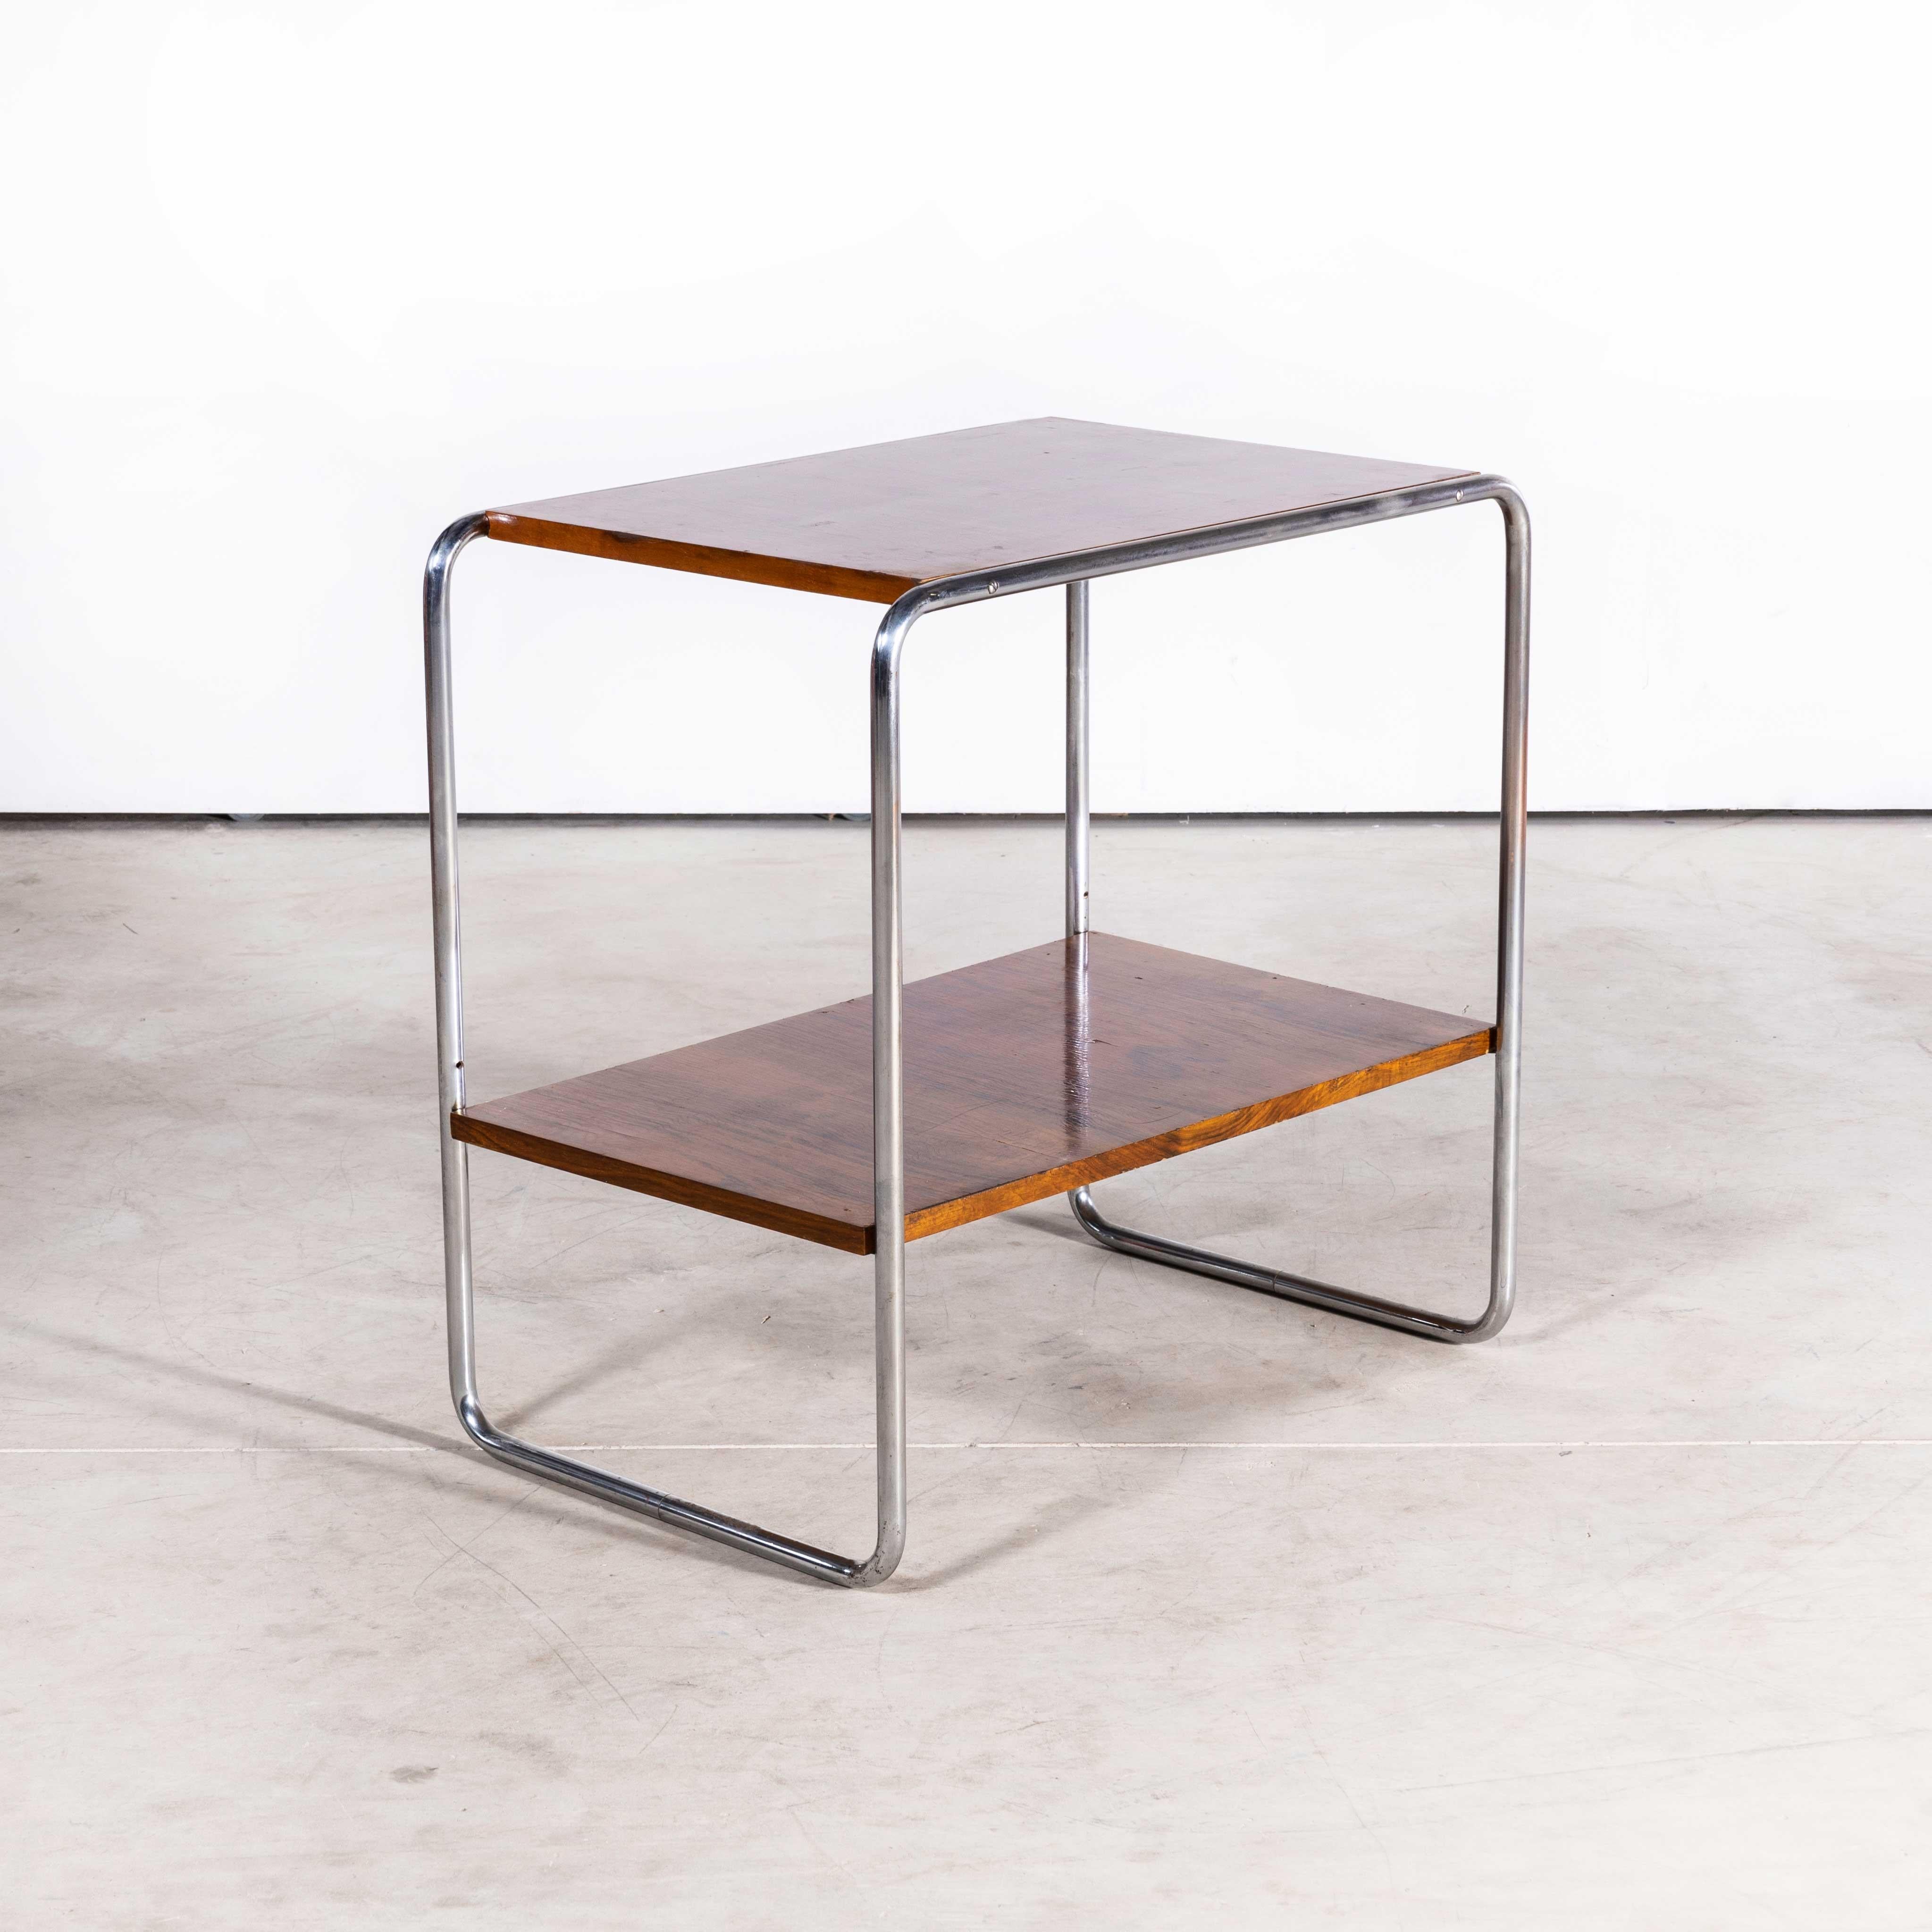 1960s Chrome Two Tier Walnut Side – Occasional Table
1960s Chrome Two Tier Walnut Side – Occasional Table. Beautiful simple and Classic midcentury side table sourced in the Czech Republic. Czech design will always be affiliated to the Bauhaus